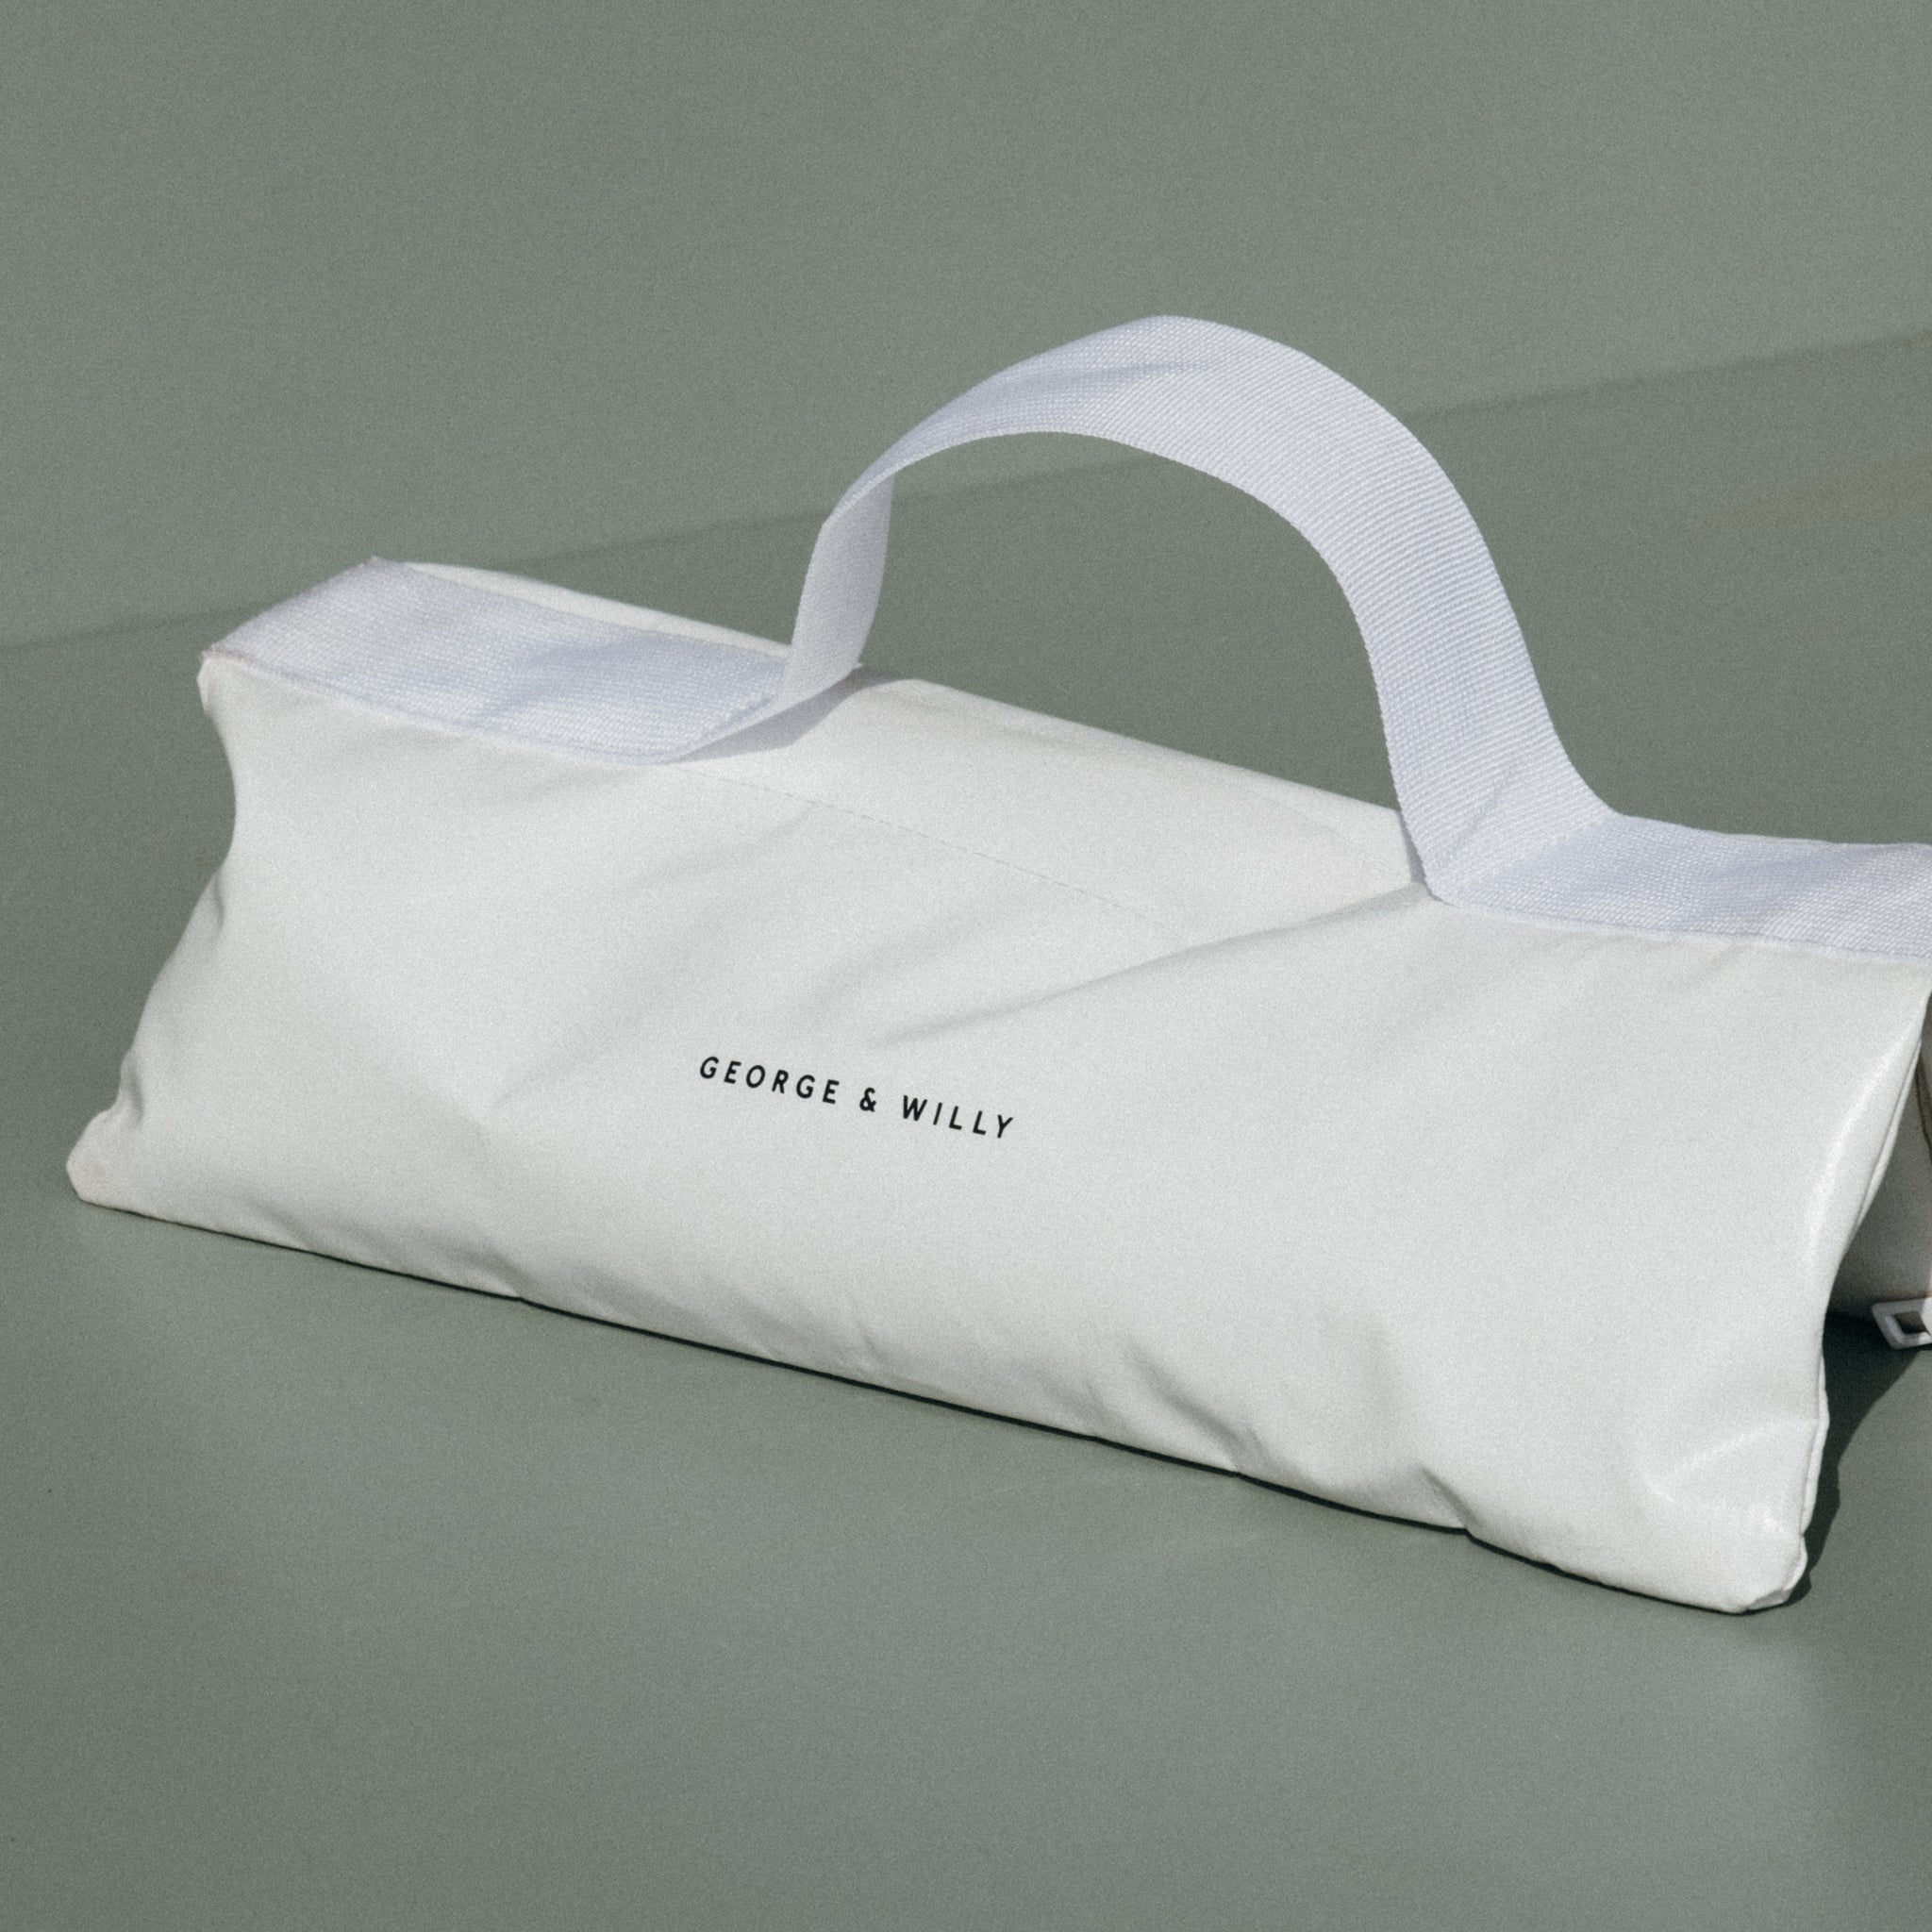 An empty white sandbag designed to weigh down an outdoor sign in windy conditions